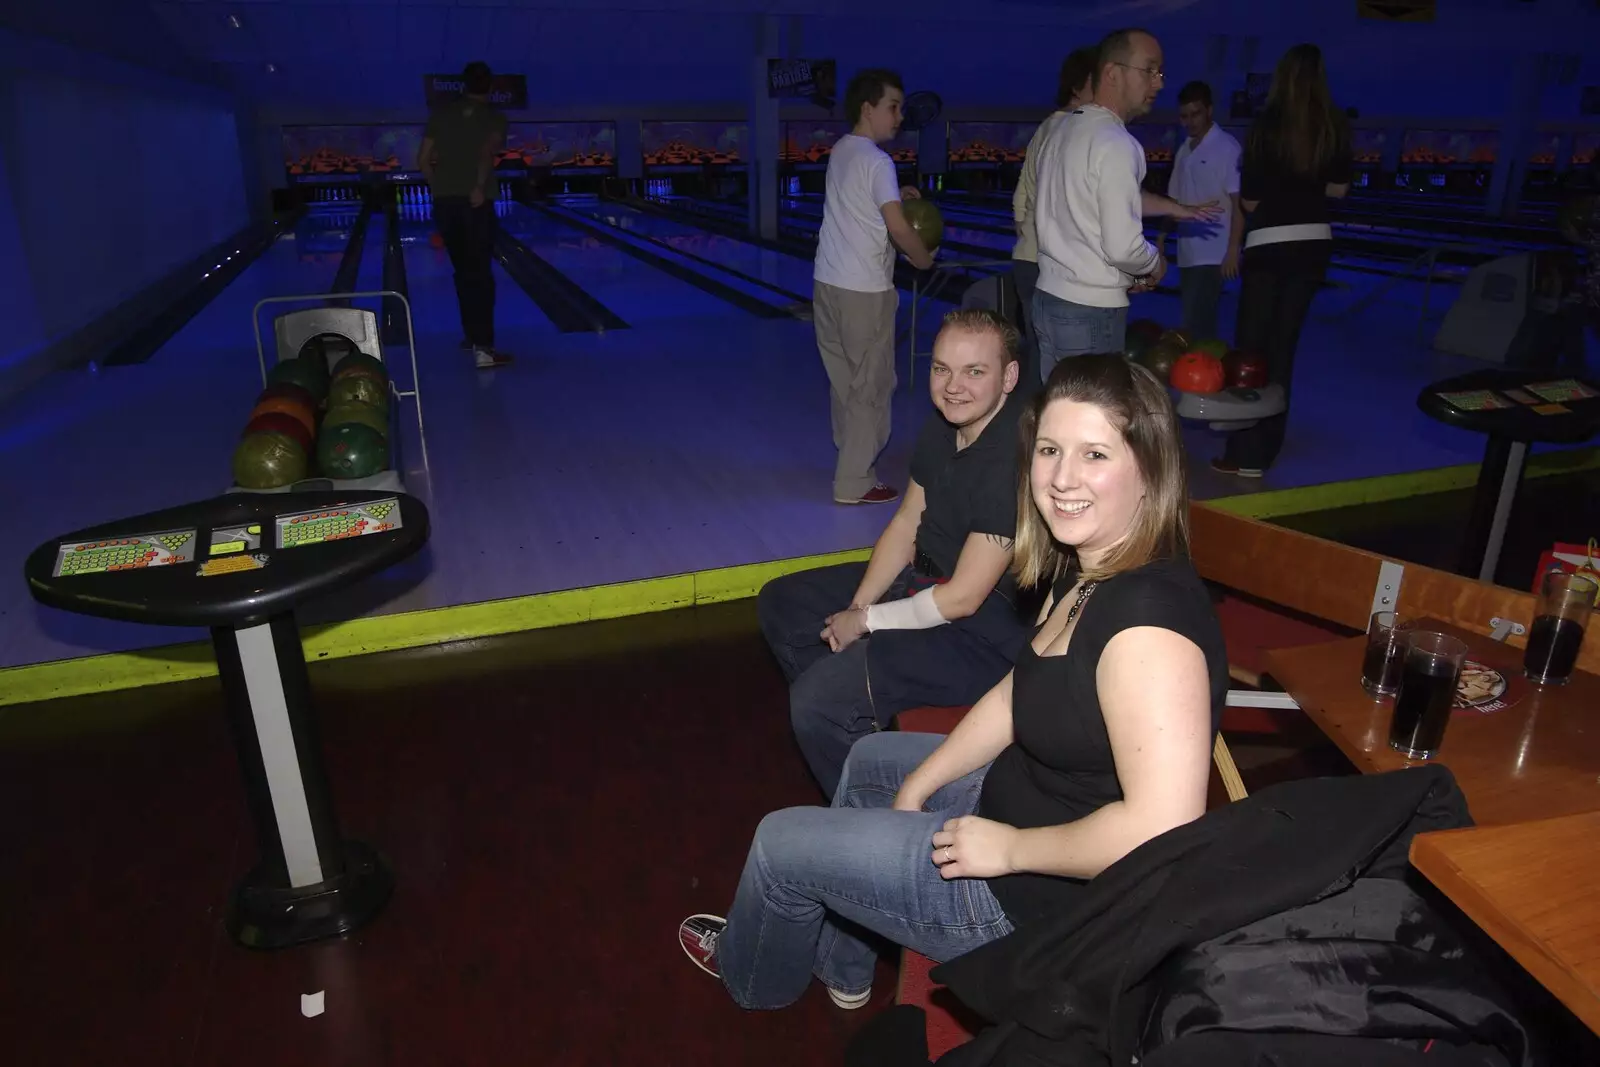 More of the group, from Ten-pin Bowling and Birthdays, Cambridge Leisure Park, Cambridge - 17th February 2007